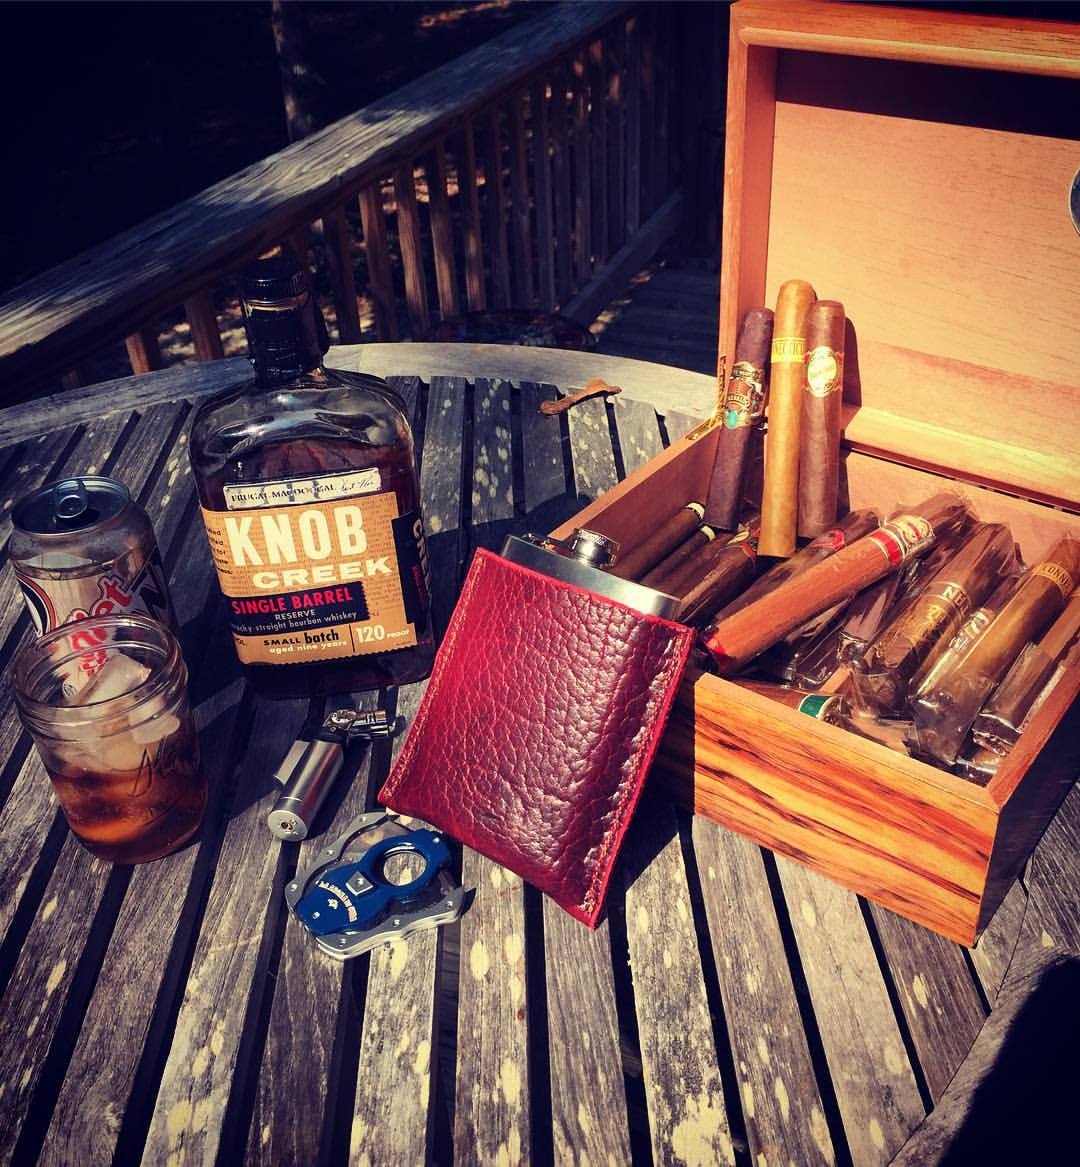 Getting ready to de-stress with nature and a few of my favorite things. 🌿🌲🍺🔥💨
A Legendary Saxon Oxblood thick, American Bison leather Flask. I cut these from a premium hide and sew using a sturdy ⚒⚒⚒ bonded nylon thread for heirloom quality. Cuts are...